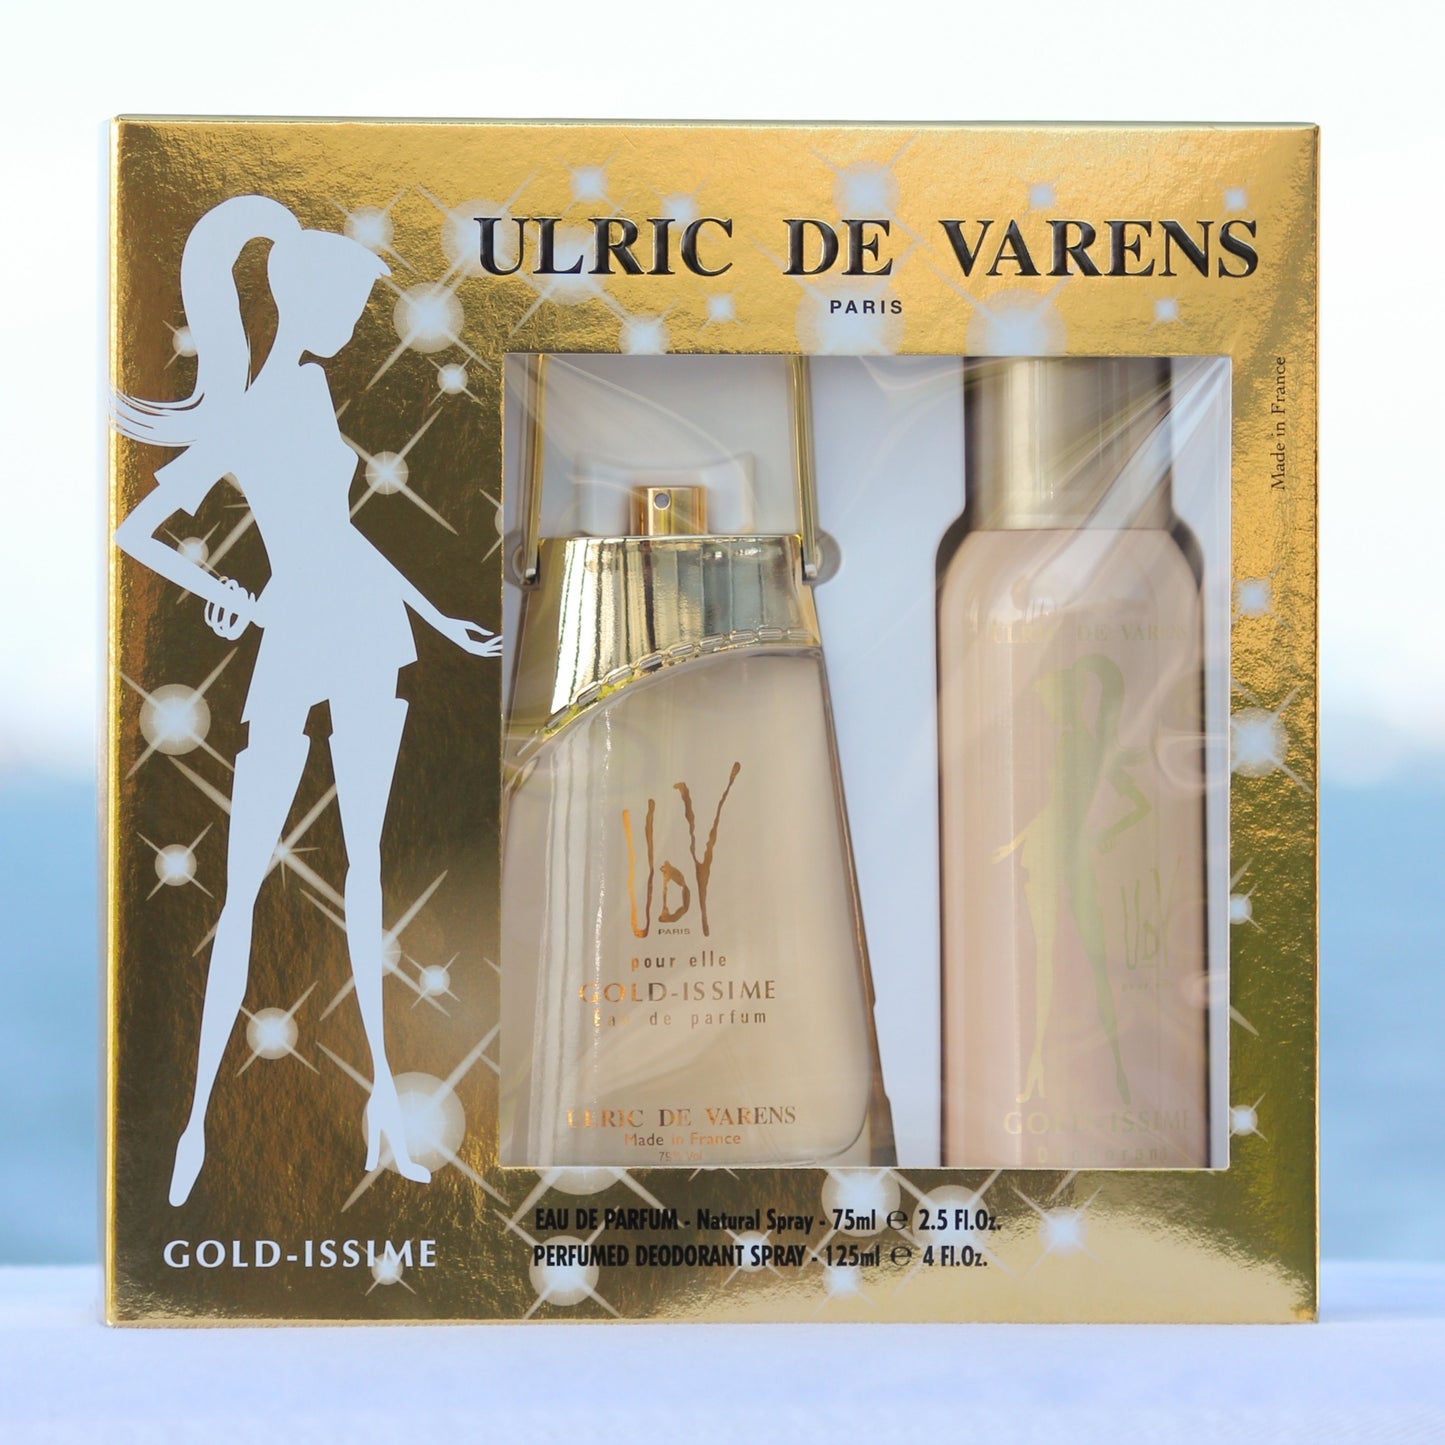 Ulric De Varens Gold-issime Gift Set women's perfume 2.5 EDP and deodorant 4 oz in front of beach